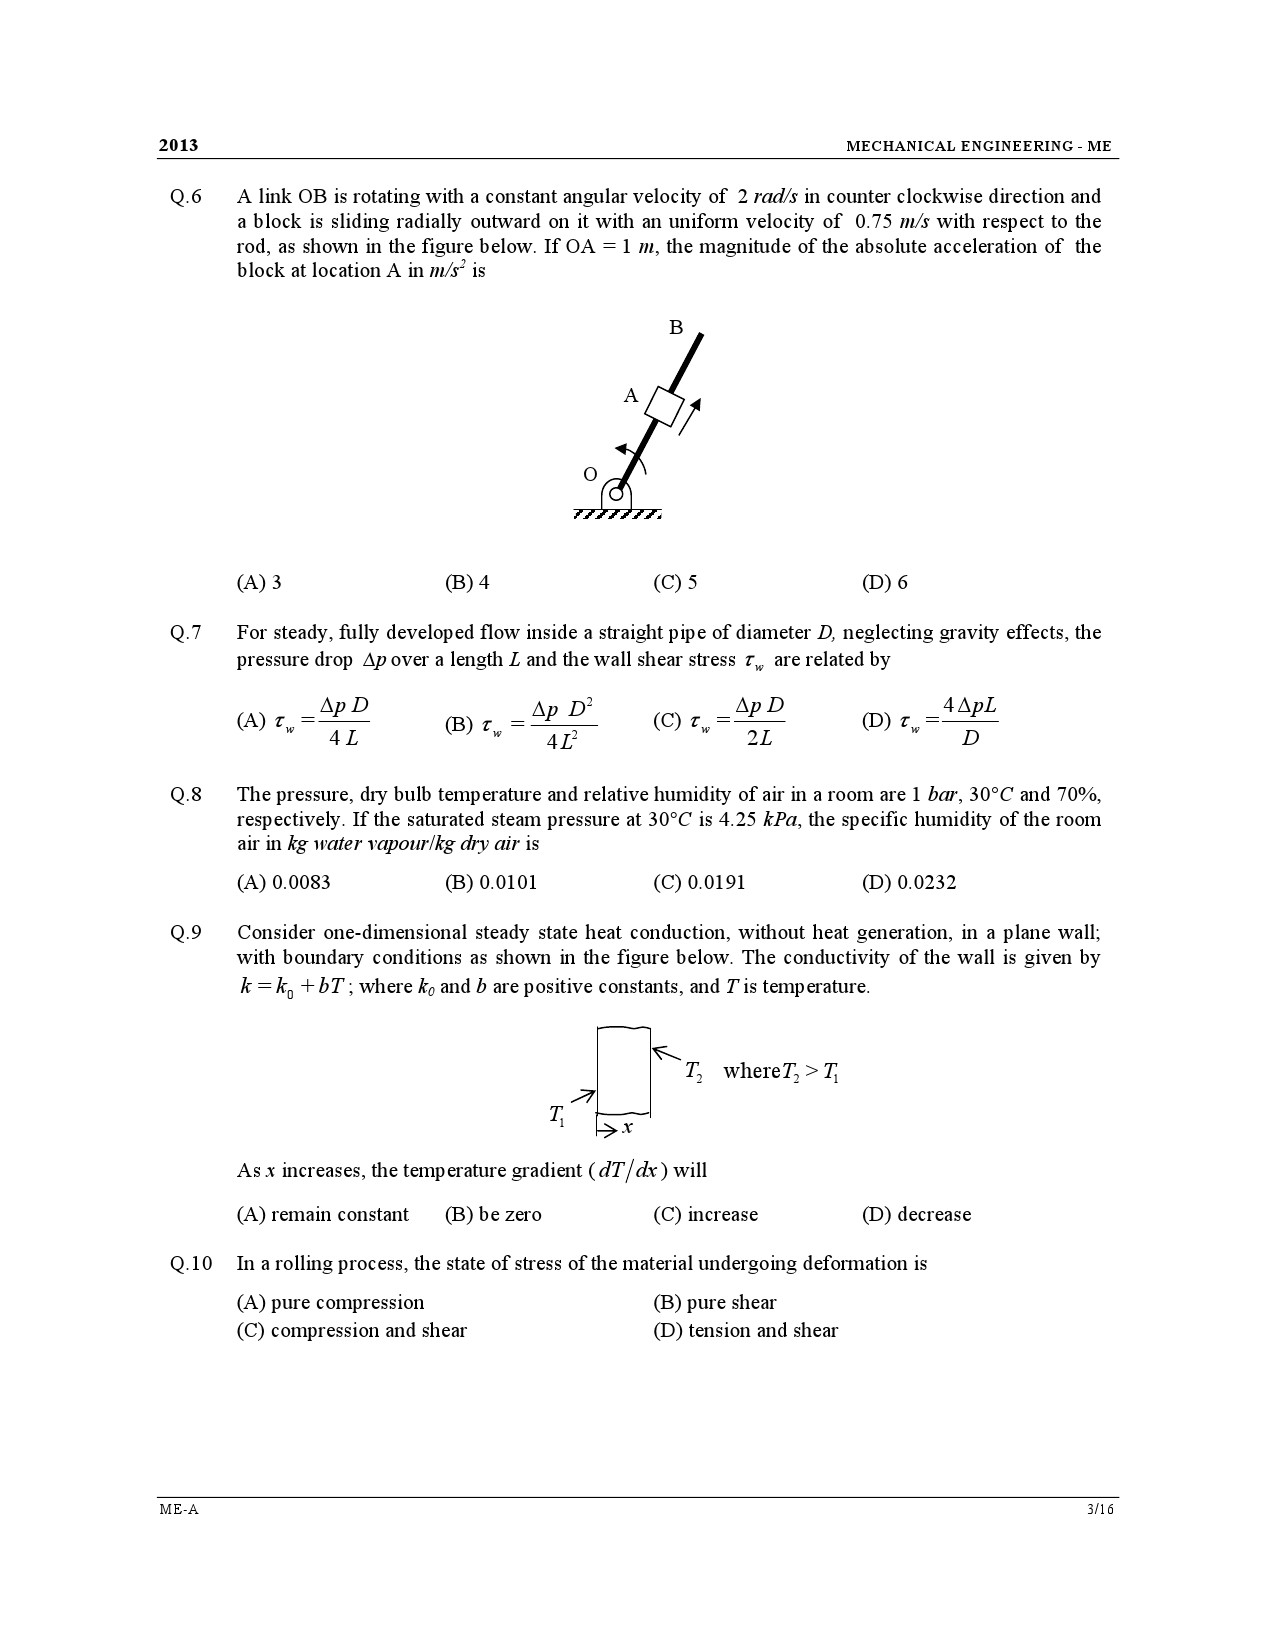 GATE Exam Question Paper 2013 Mechanical Engineering 3